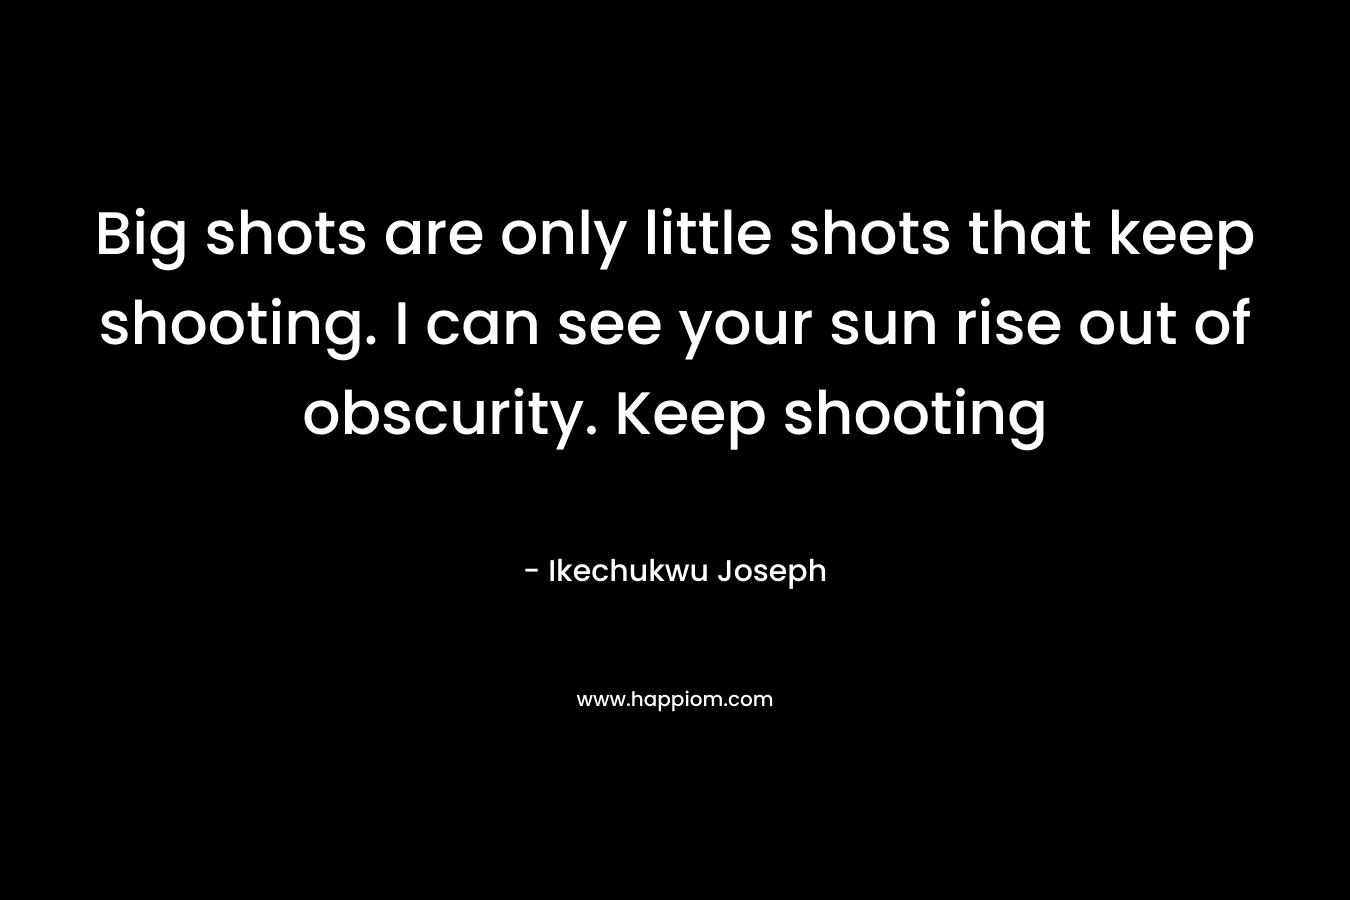 Big shots are only little shots that keep shooting. I can see your sun rise out of obscurity. Keep shooting